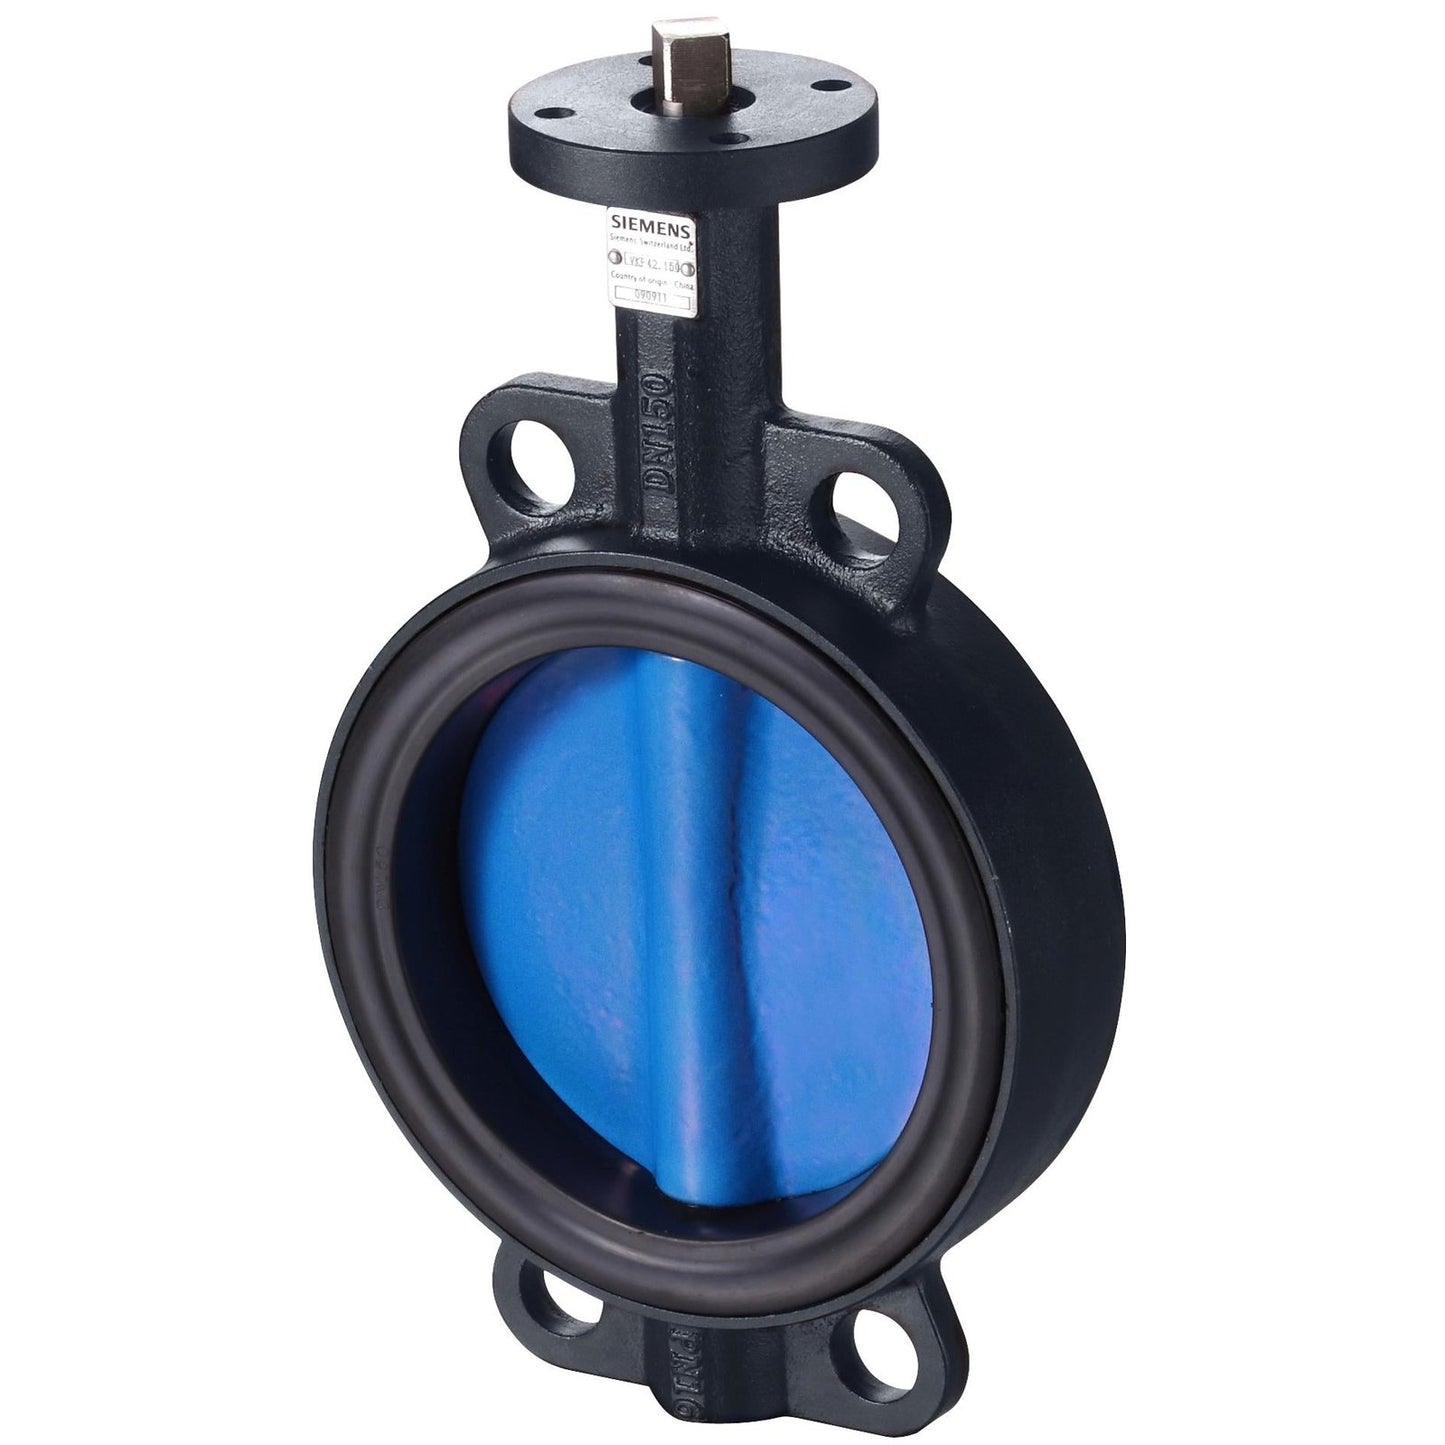 VKF42.125 Butterfly valves PN16 for flanged connections, with tight shutoff